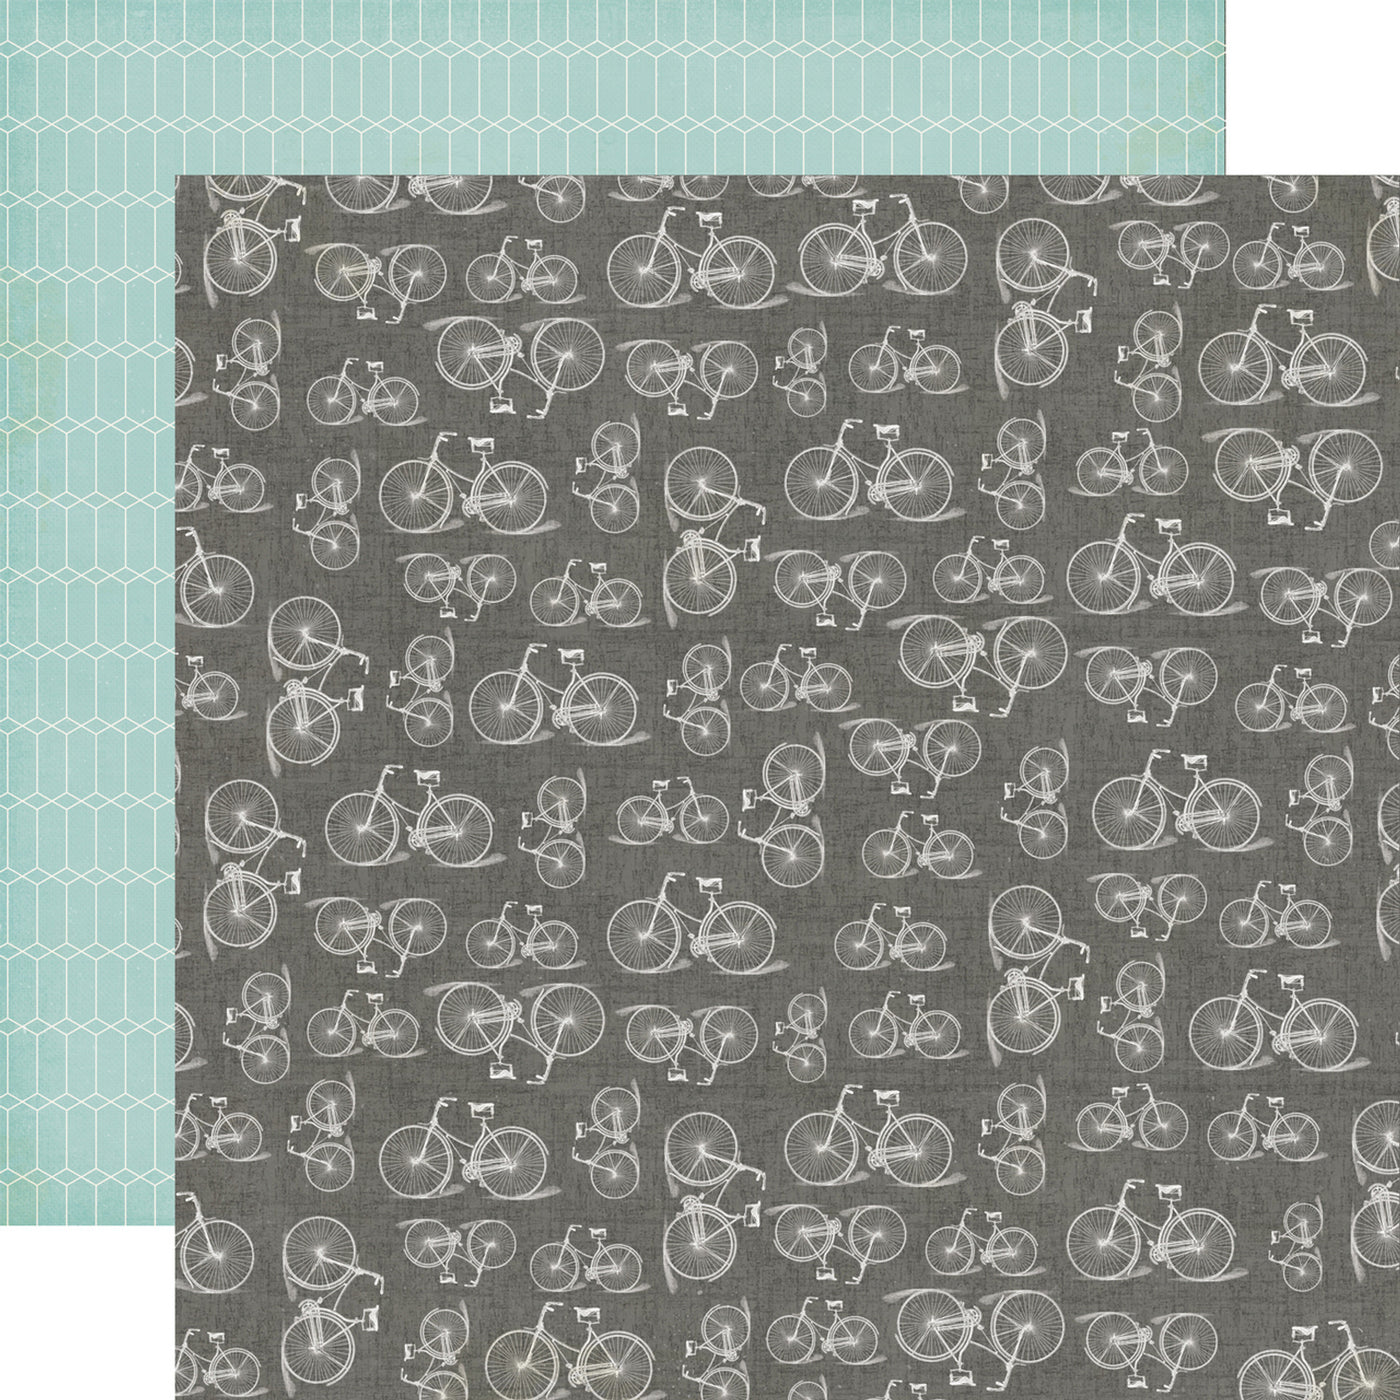 12x12 double-sided patterned paper. (Side A - white bicycles on a gray background, Side B - white geometric pattern on a turquoise background)